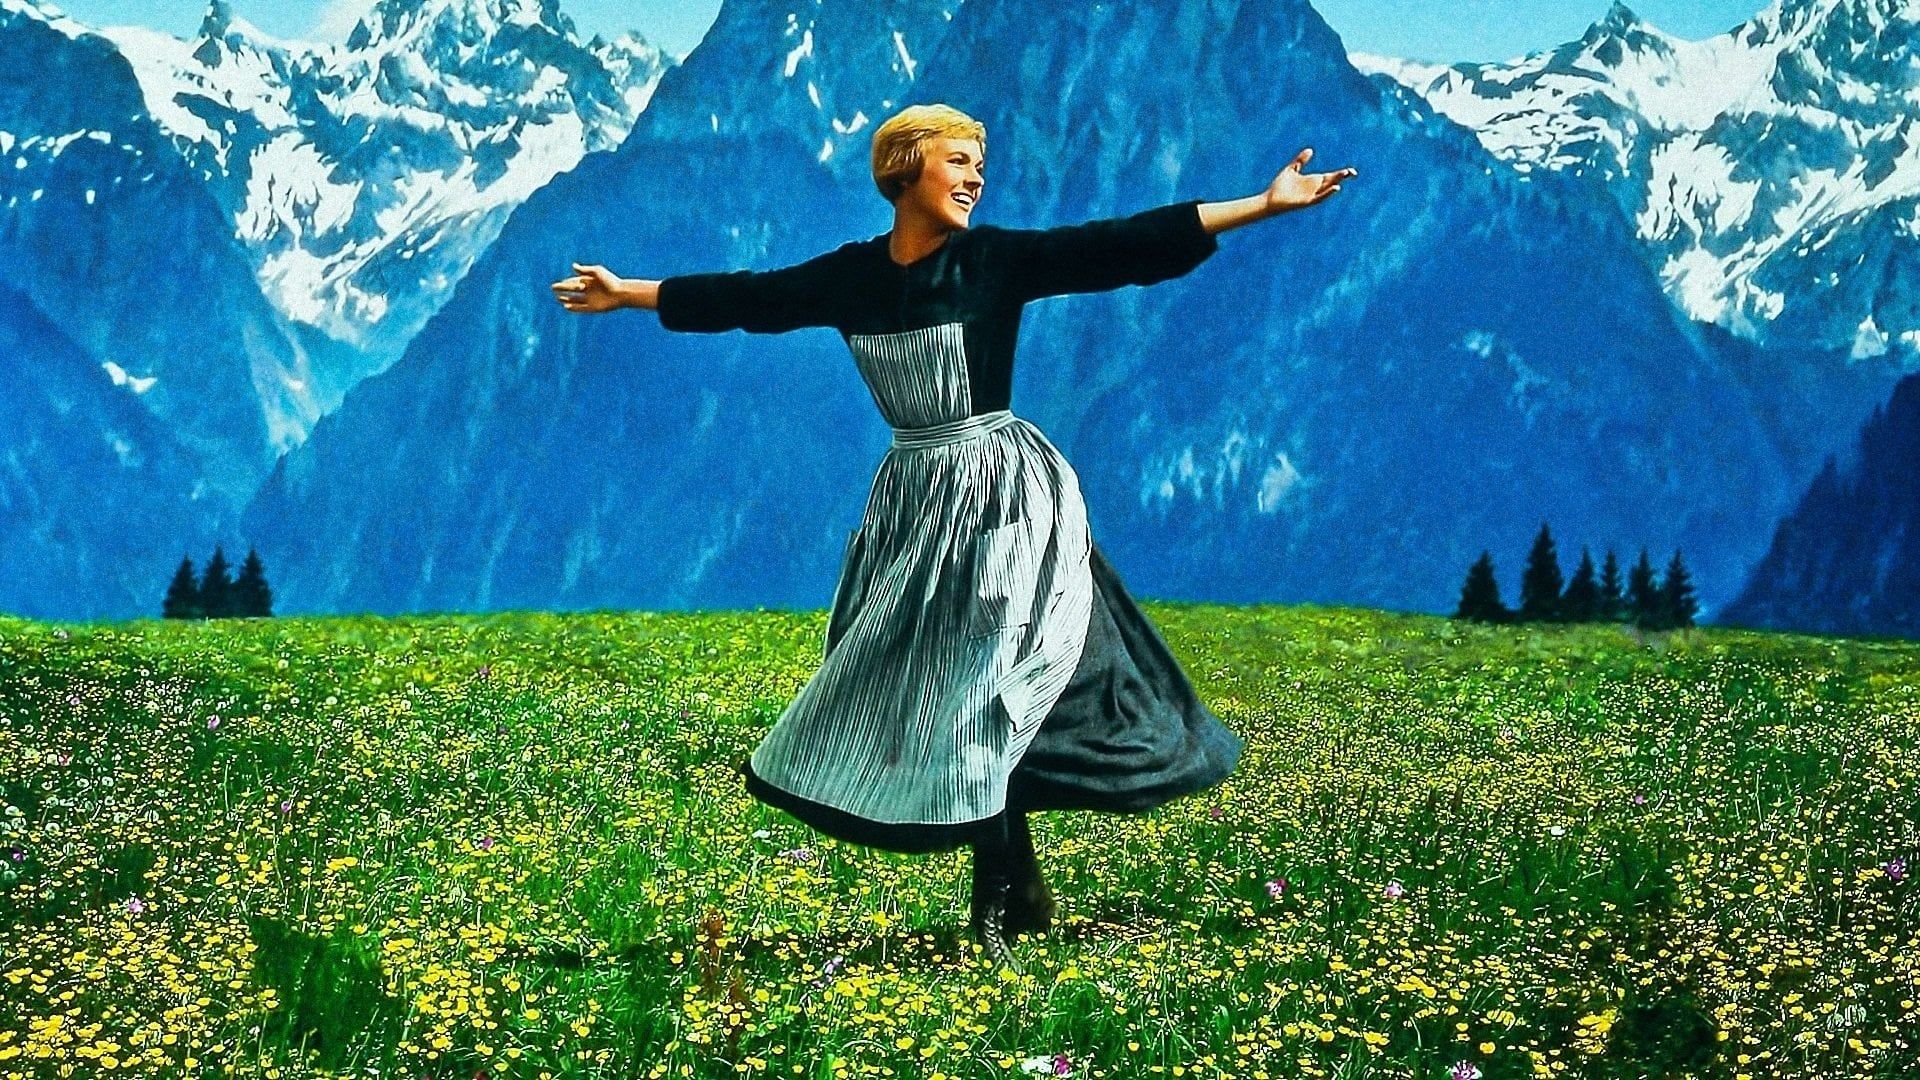 The Sound of Music Backdrop